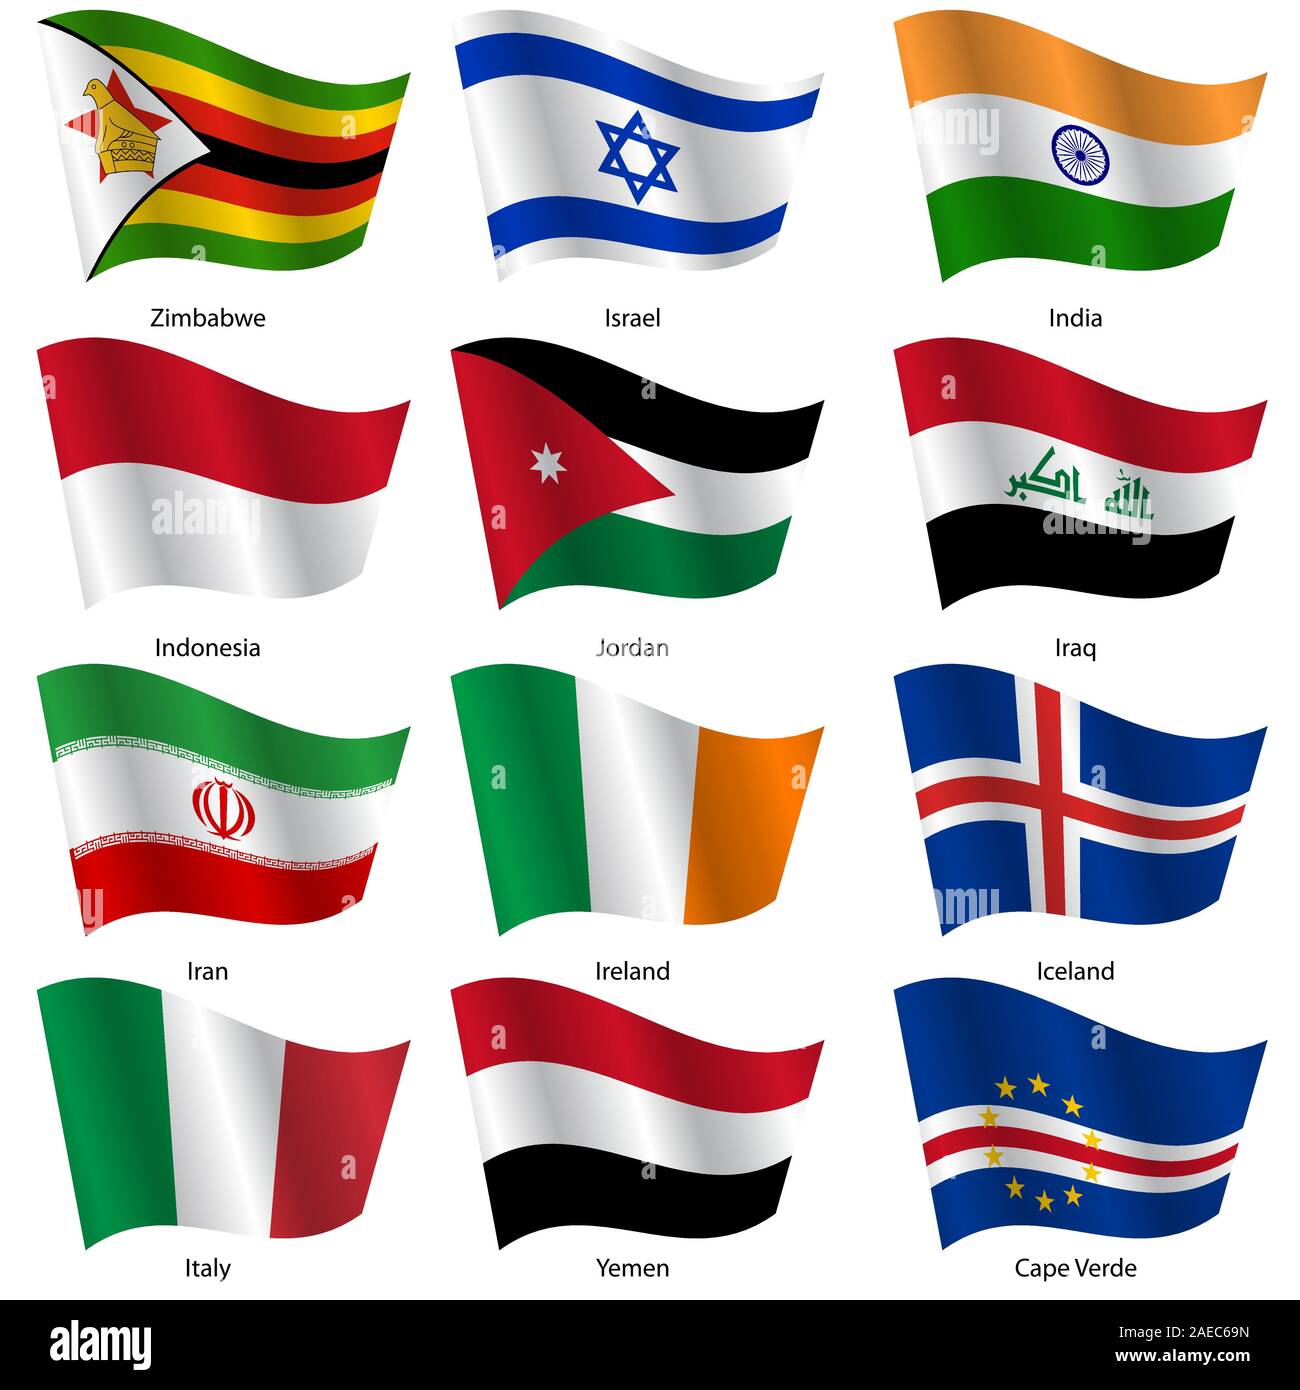 Iraq flag coloring - Country flags